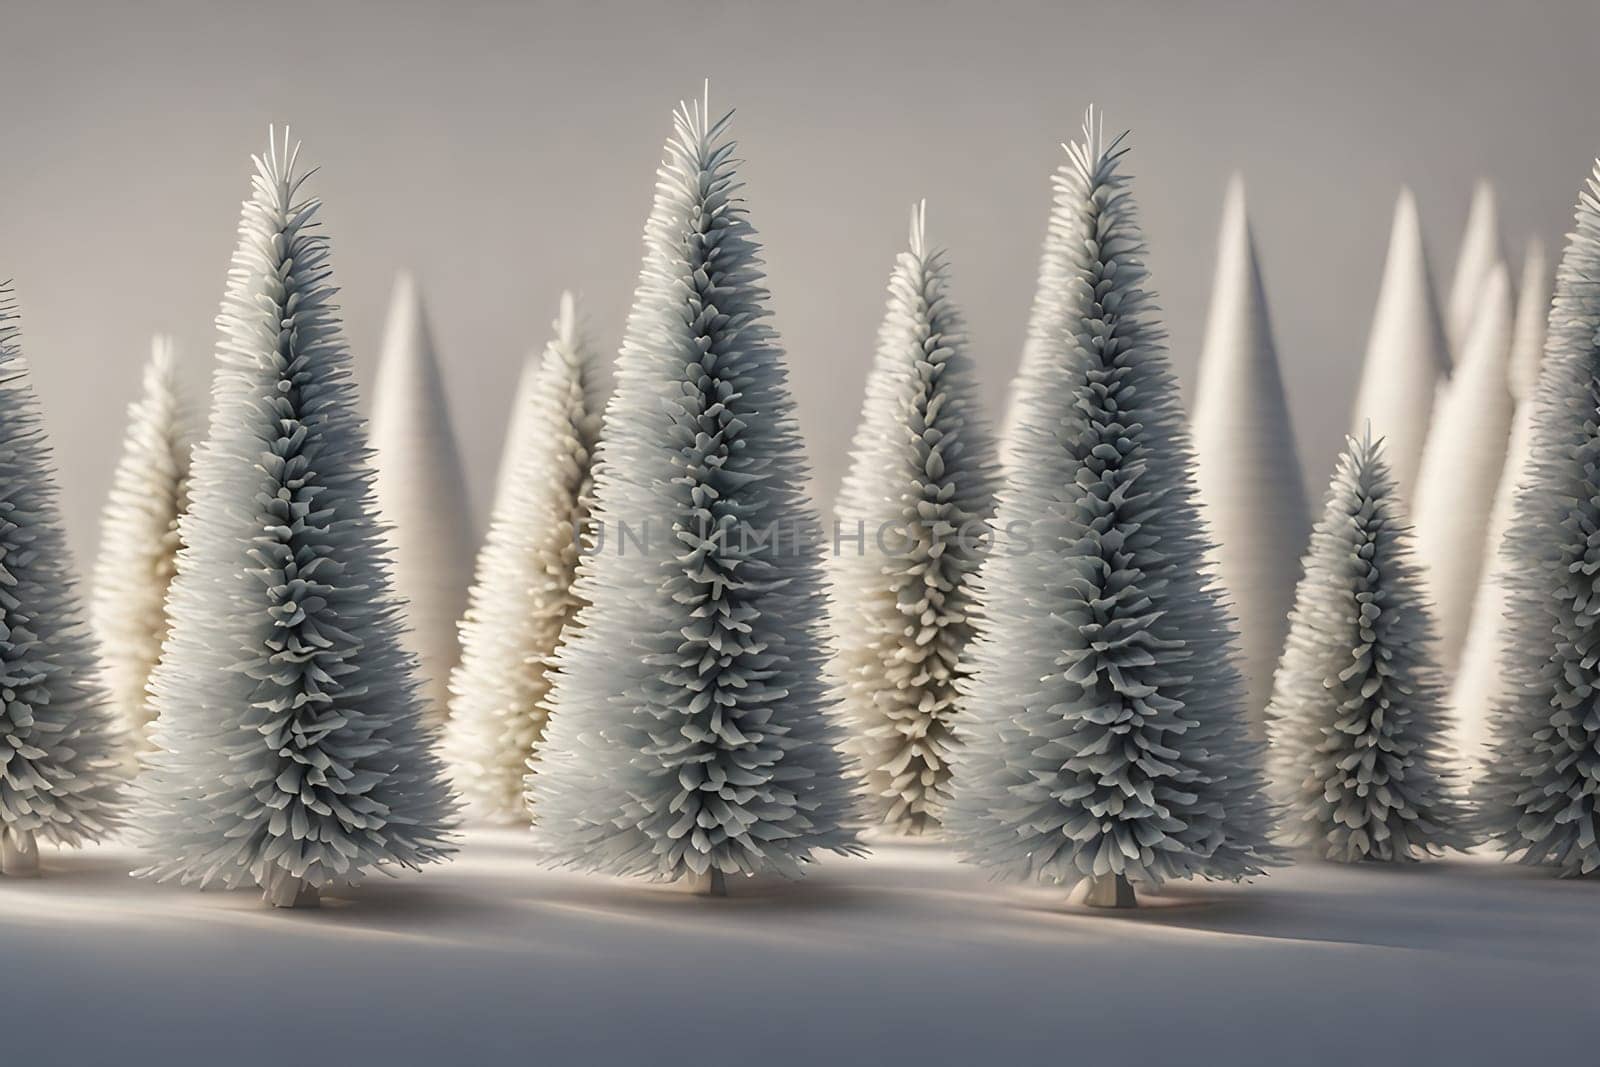 3D render of artificial Christmas trees in the snow. Winter landscape by LanaLeta